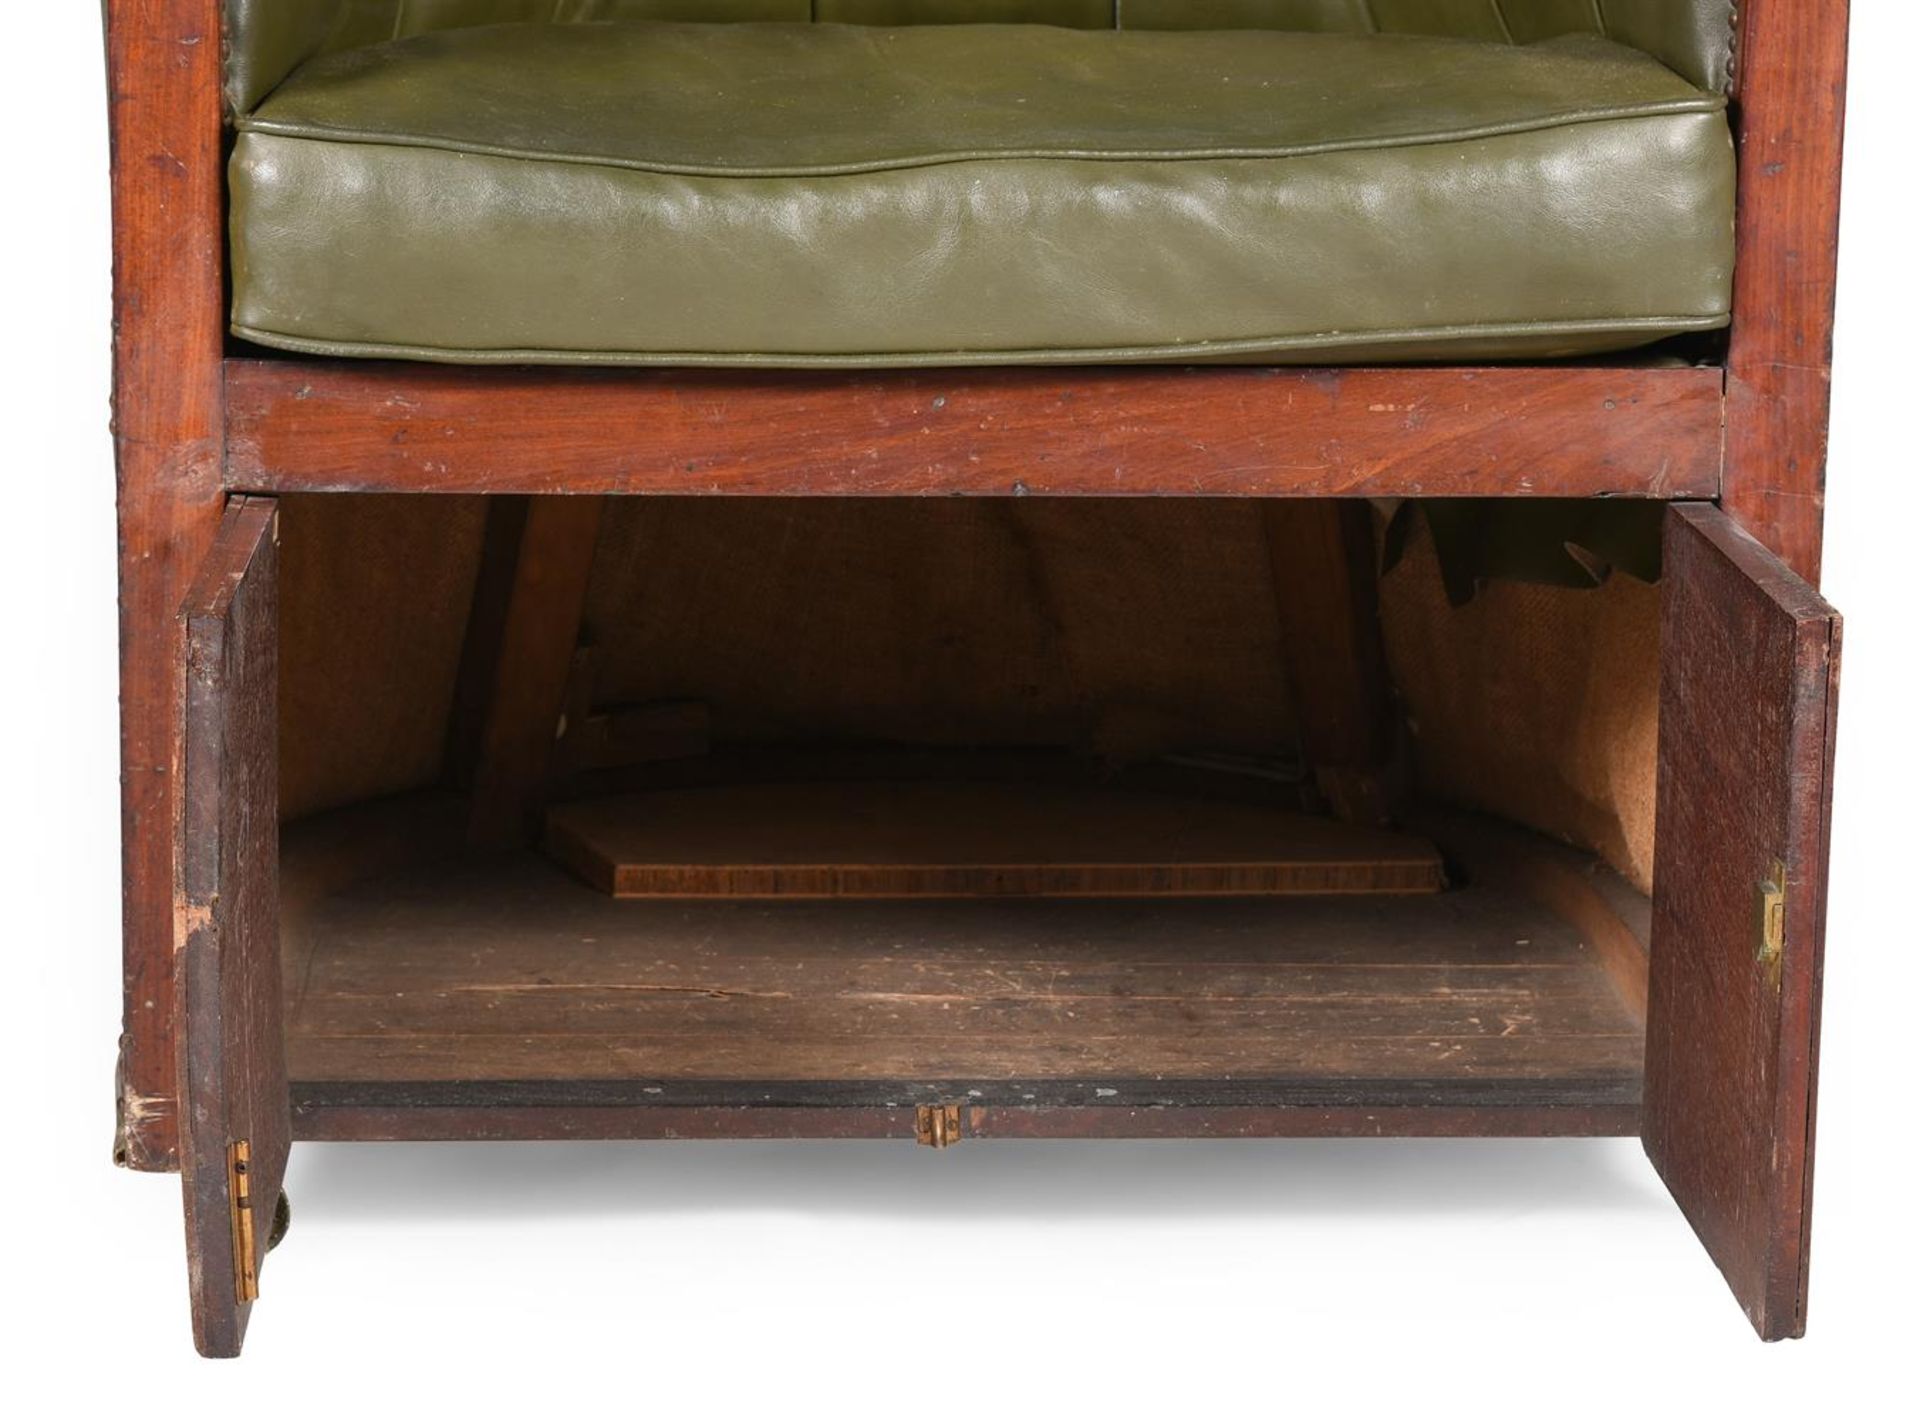 A LATE REGENCY CLOSE NAILED FAUX LEATHER UPHOLSTERED PORTER'S CHAIR, EARLY 19TH CENTURY - Image 3 of 4